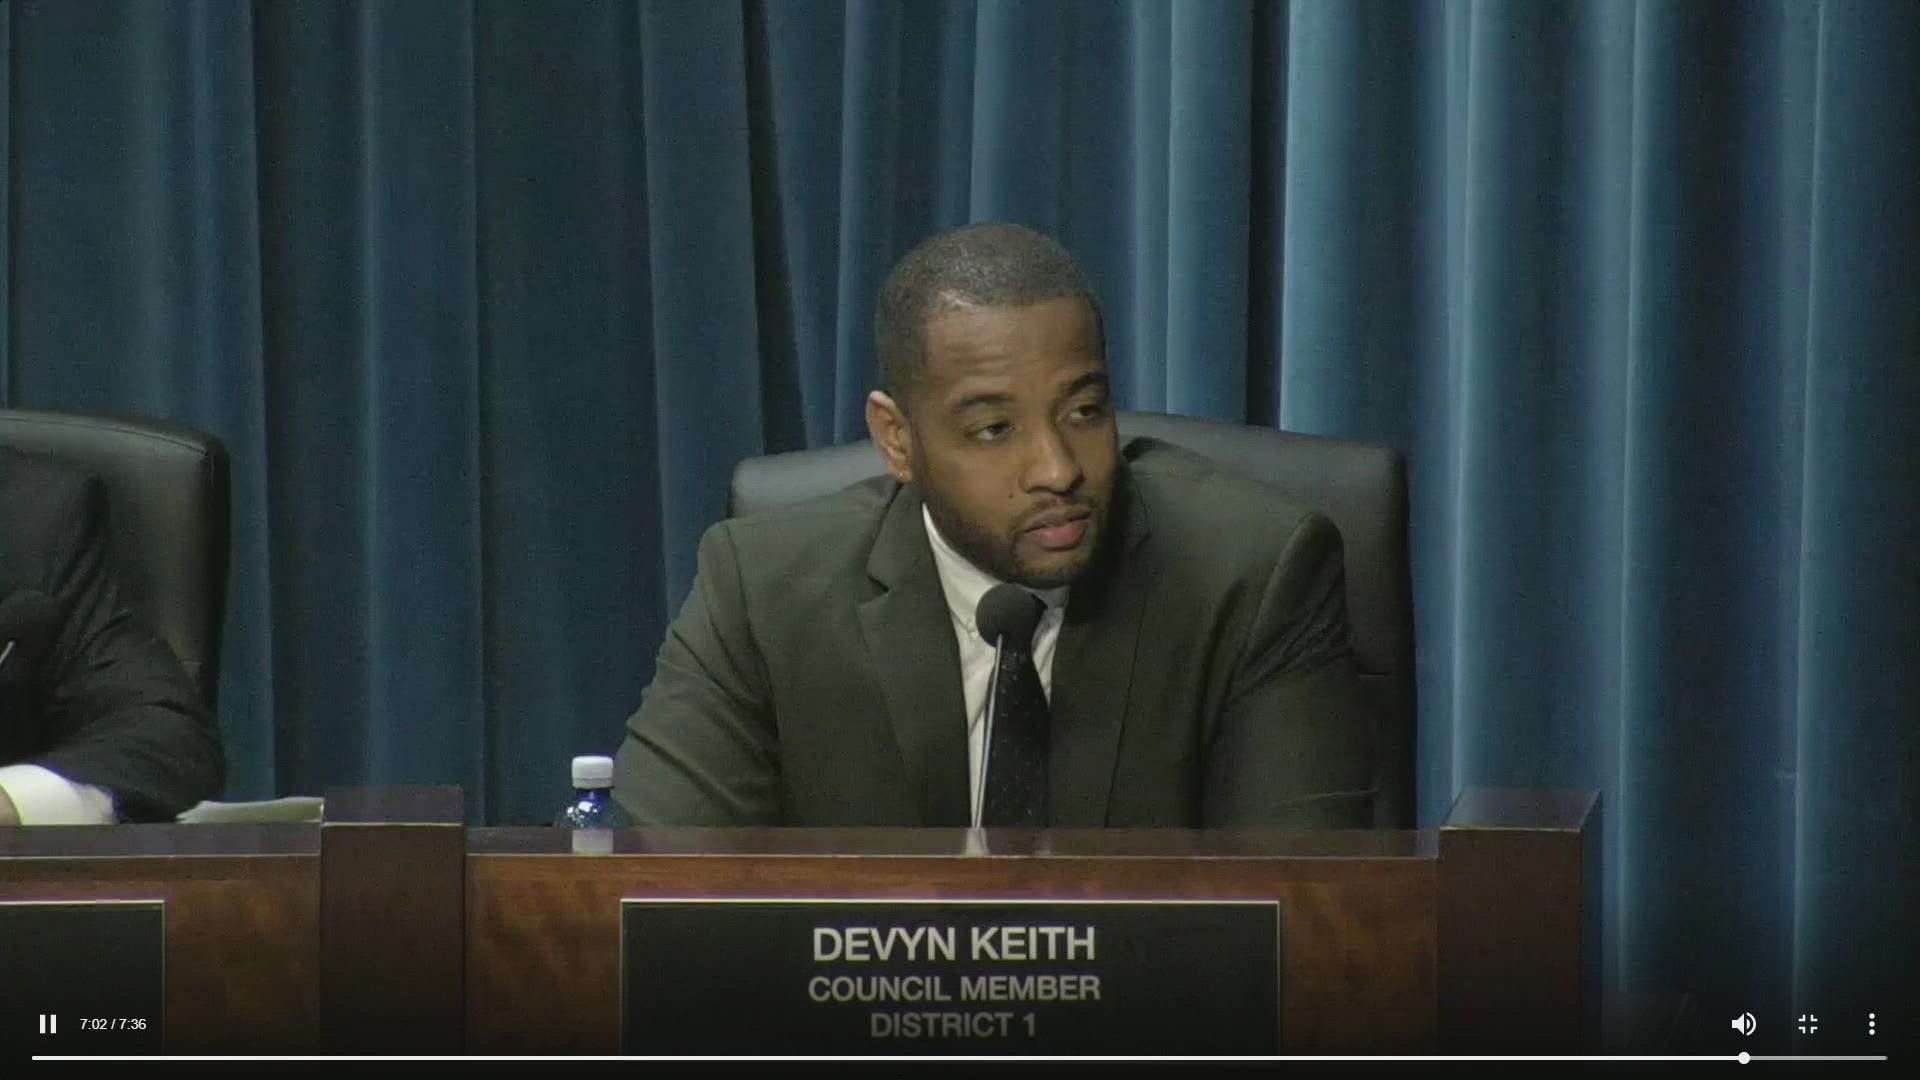 Huntsville's District 1 City Councilman Devyn Keith declines to discuss litigation, offers apologies to those affected by recent events.